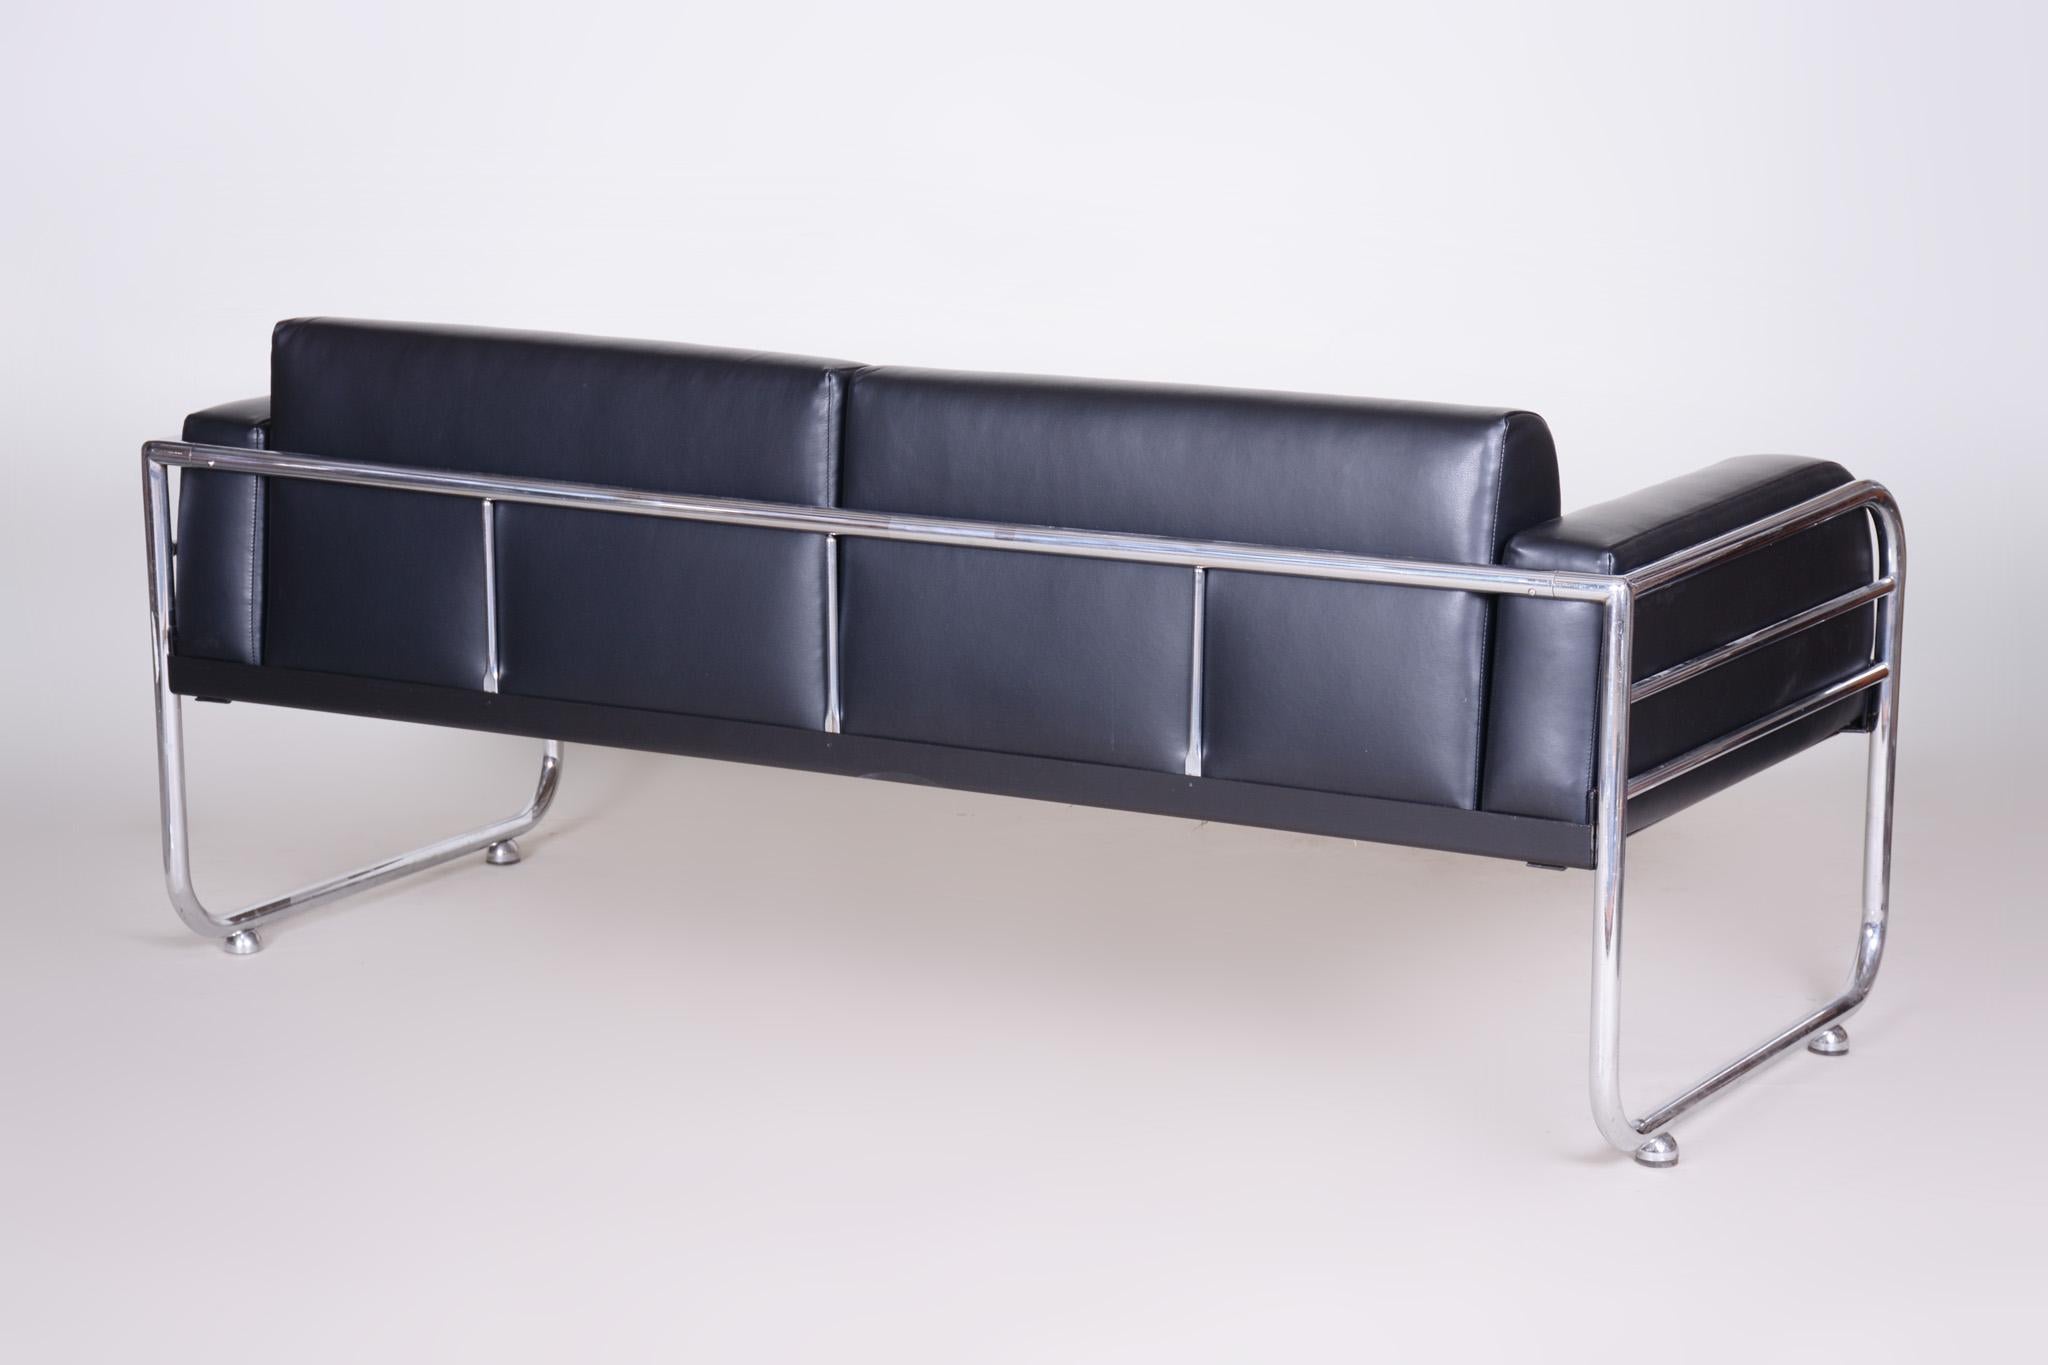 Fully Restored Bauhaus Leather and Chrome Sofa by Vichr a Spol, 1930s Czechia For Sale 6